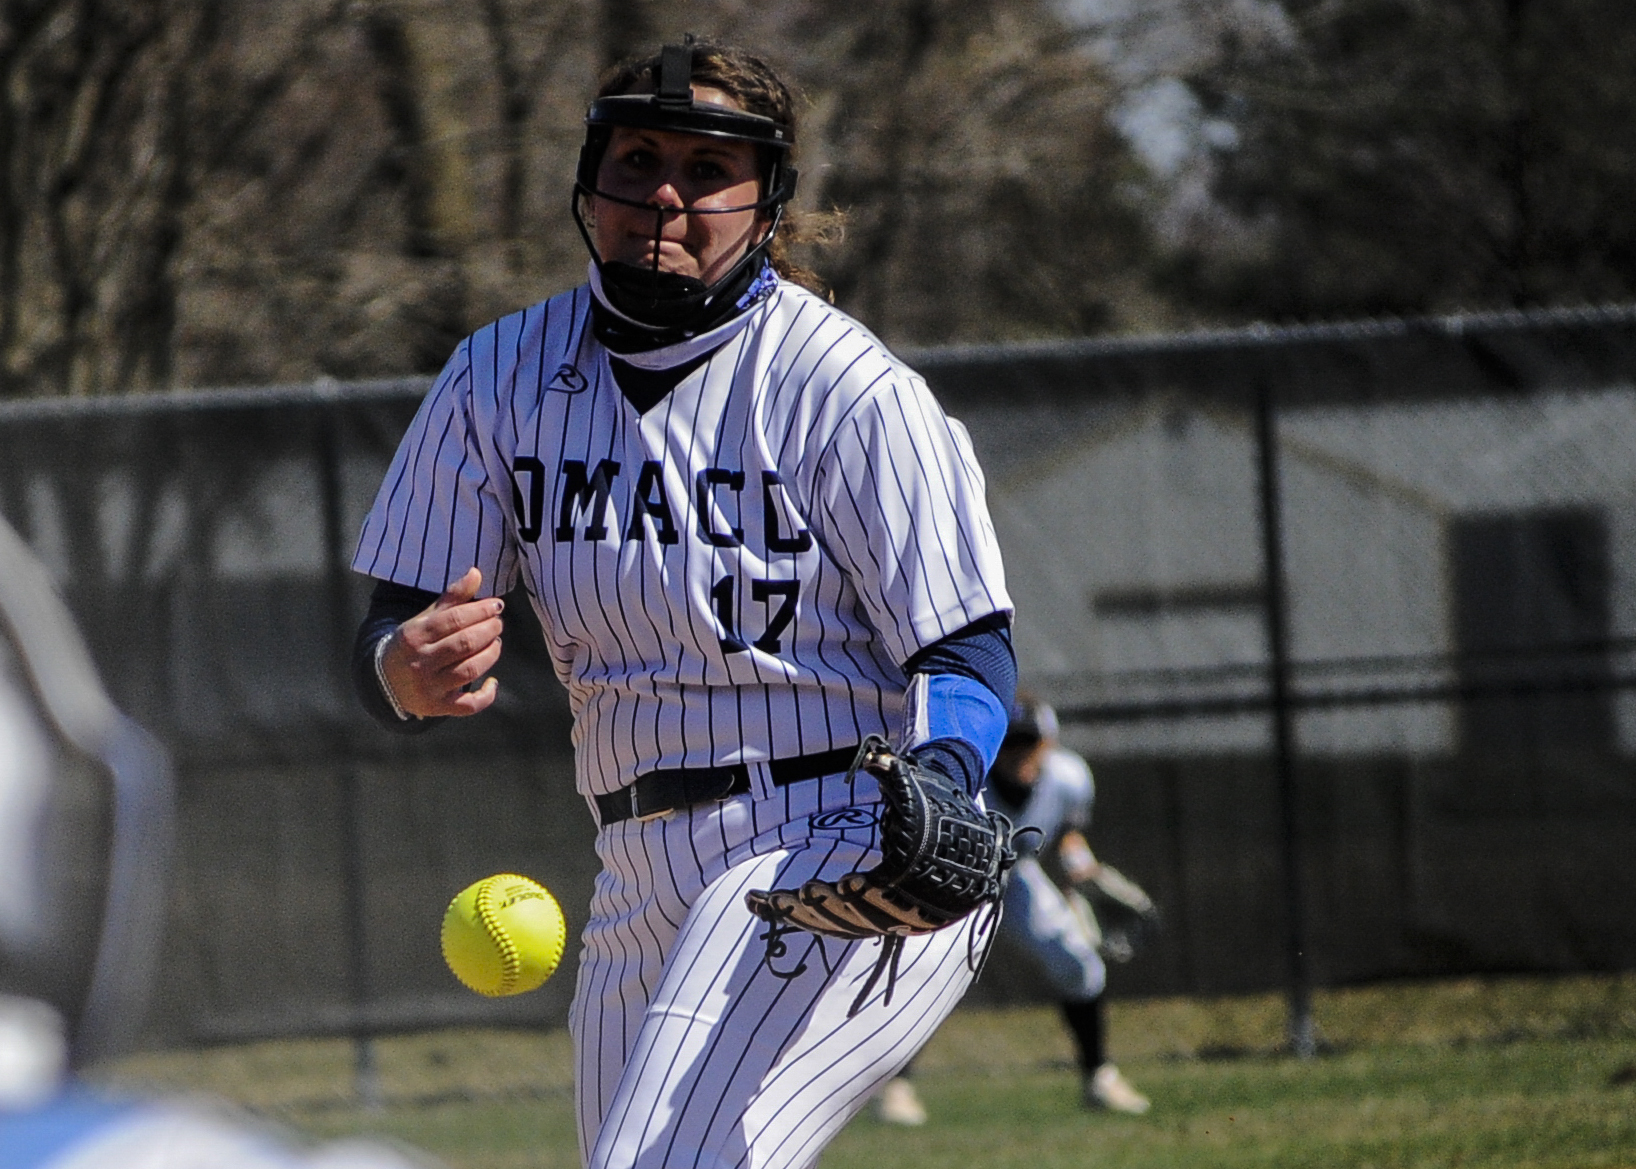 DMACC softball team sweeps doubleheader from NIACC